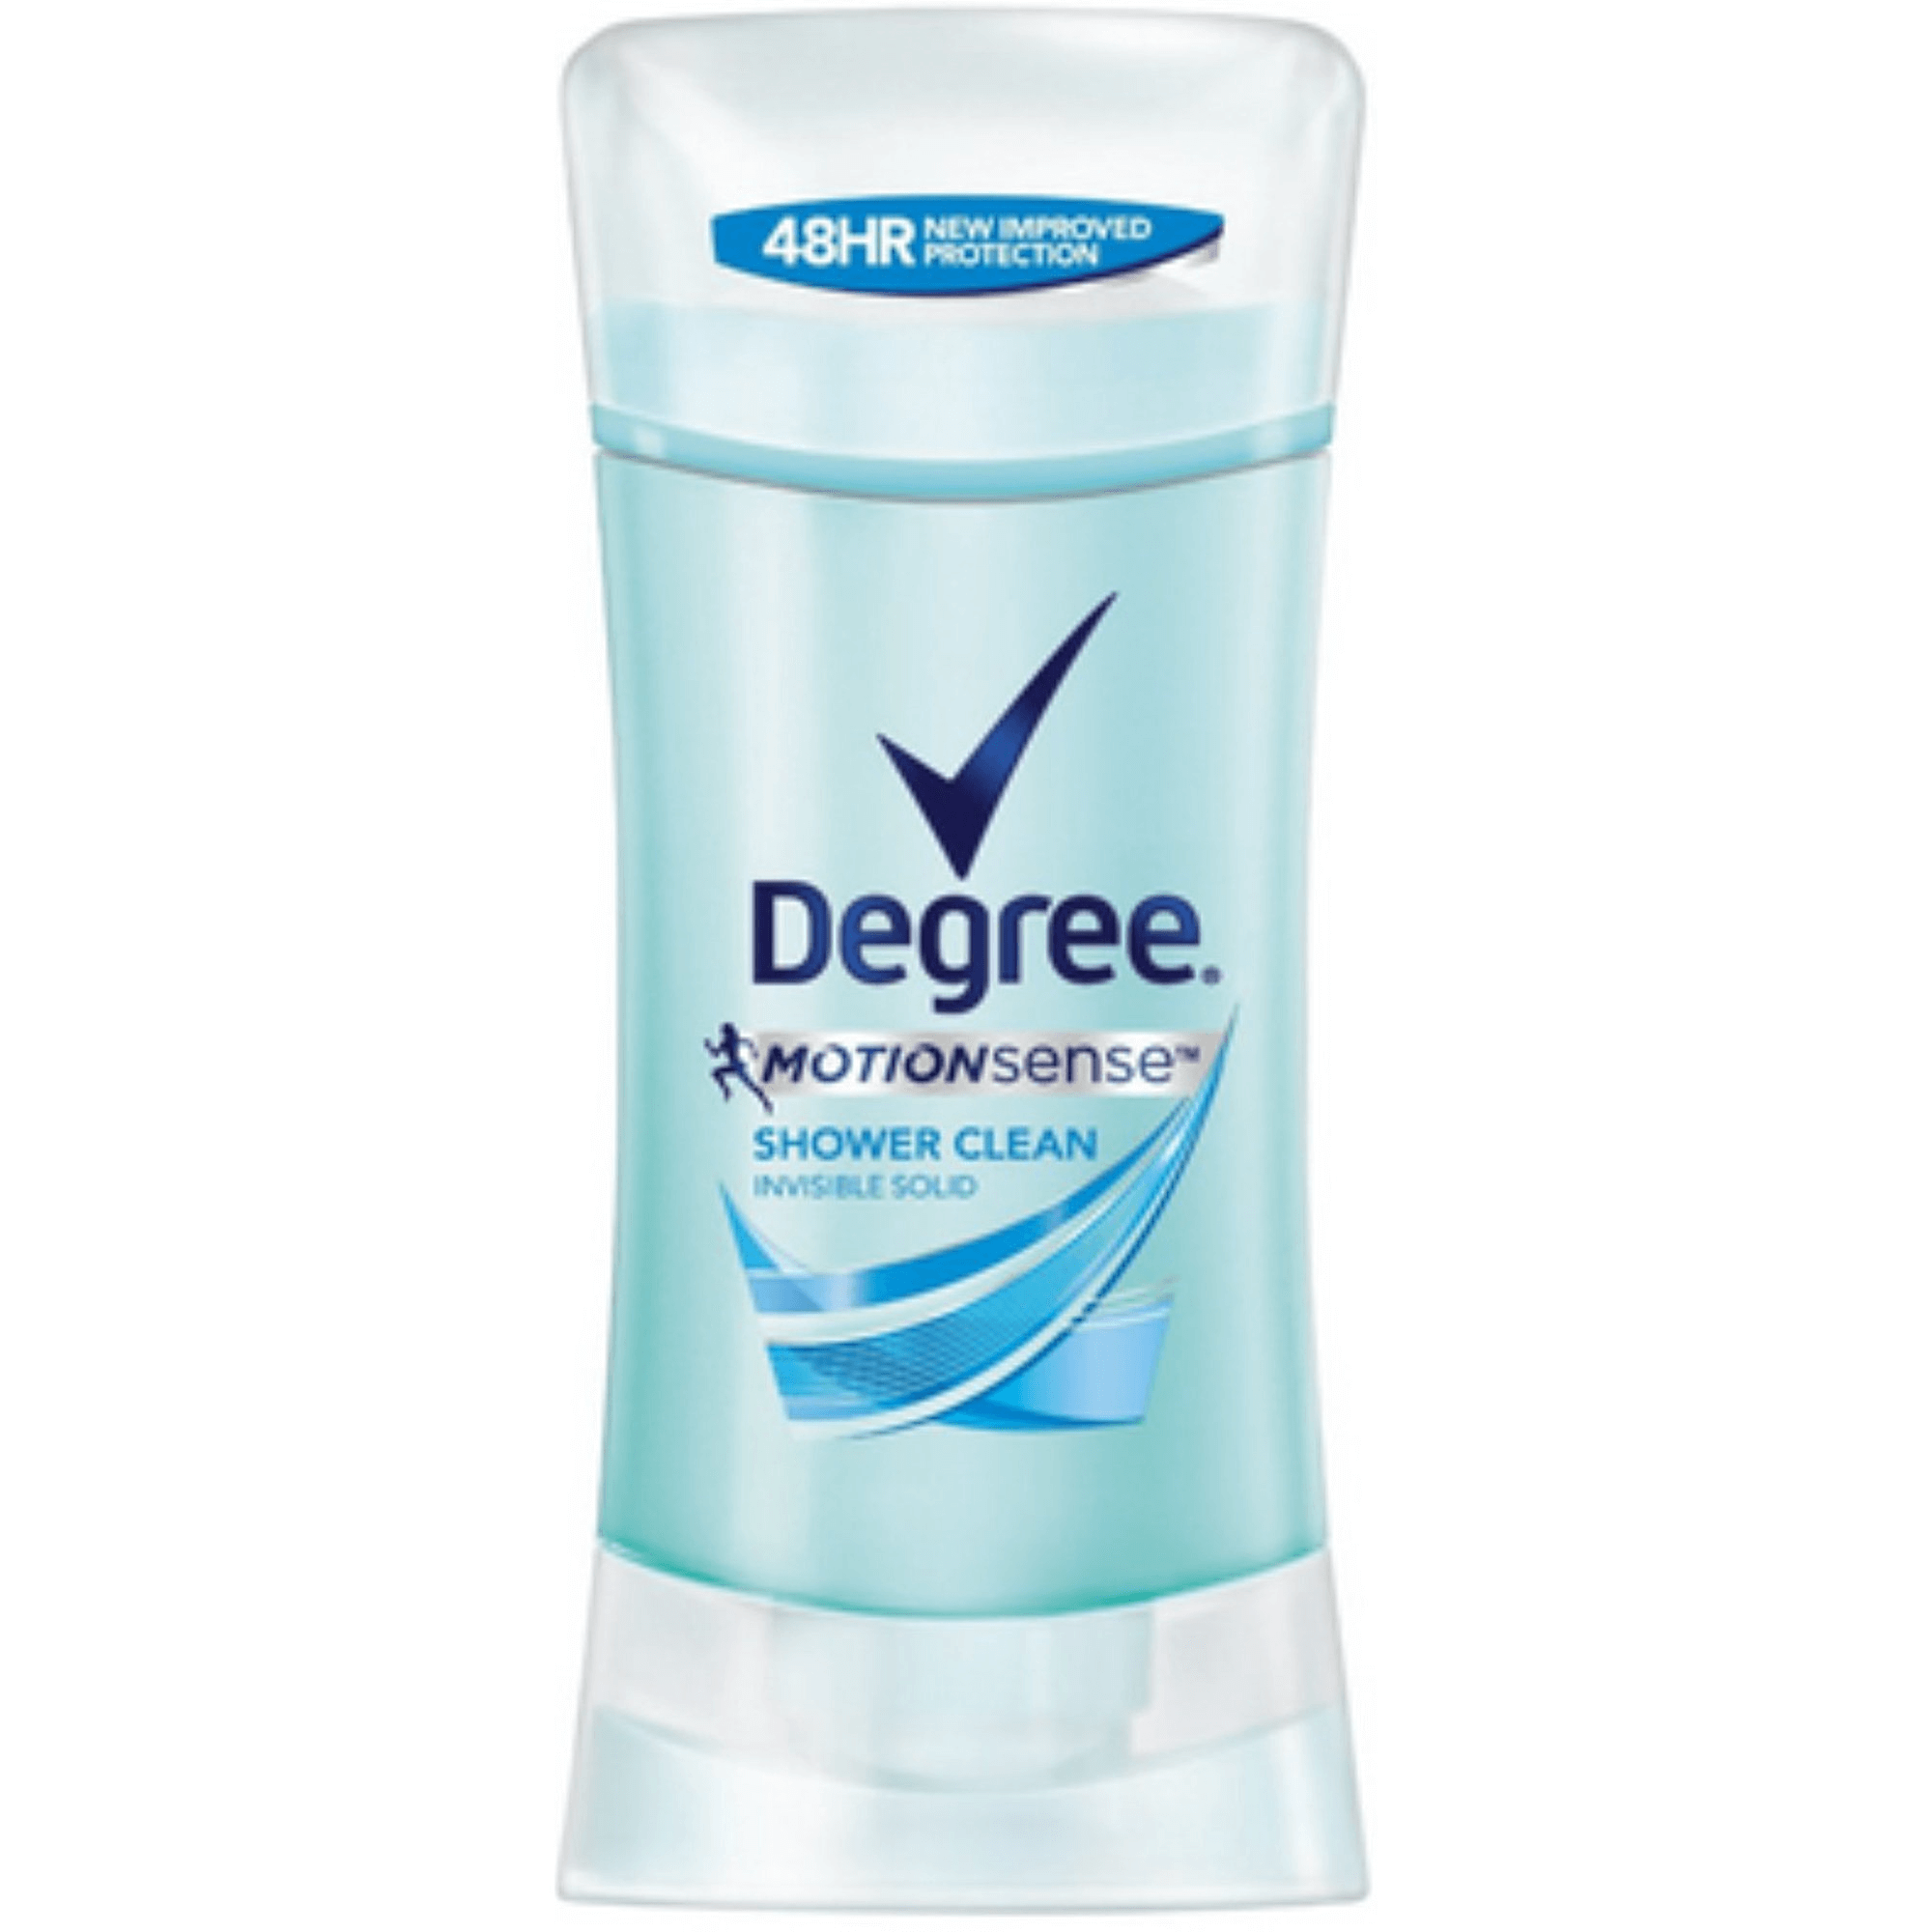 Shop Degree Expert Protection Anti-Perspirant & Deodorant Invisible Solid, Shower Clean For Women in Pakistan -Colorshow.pk